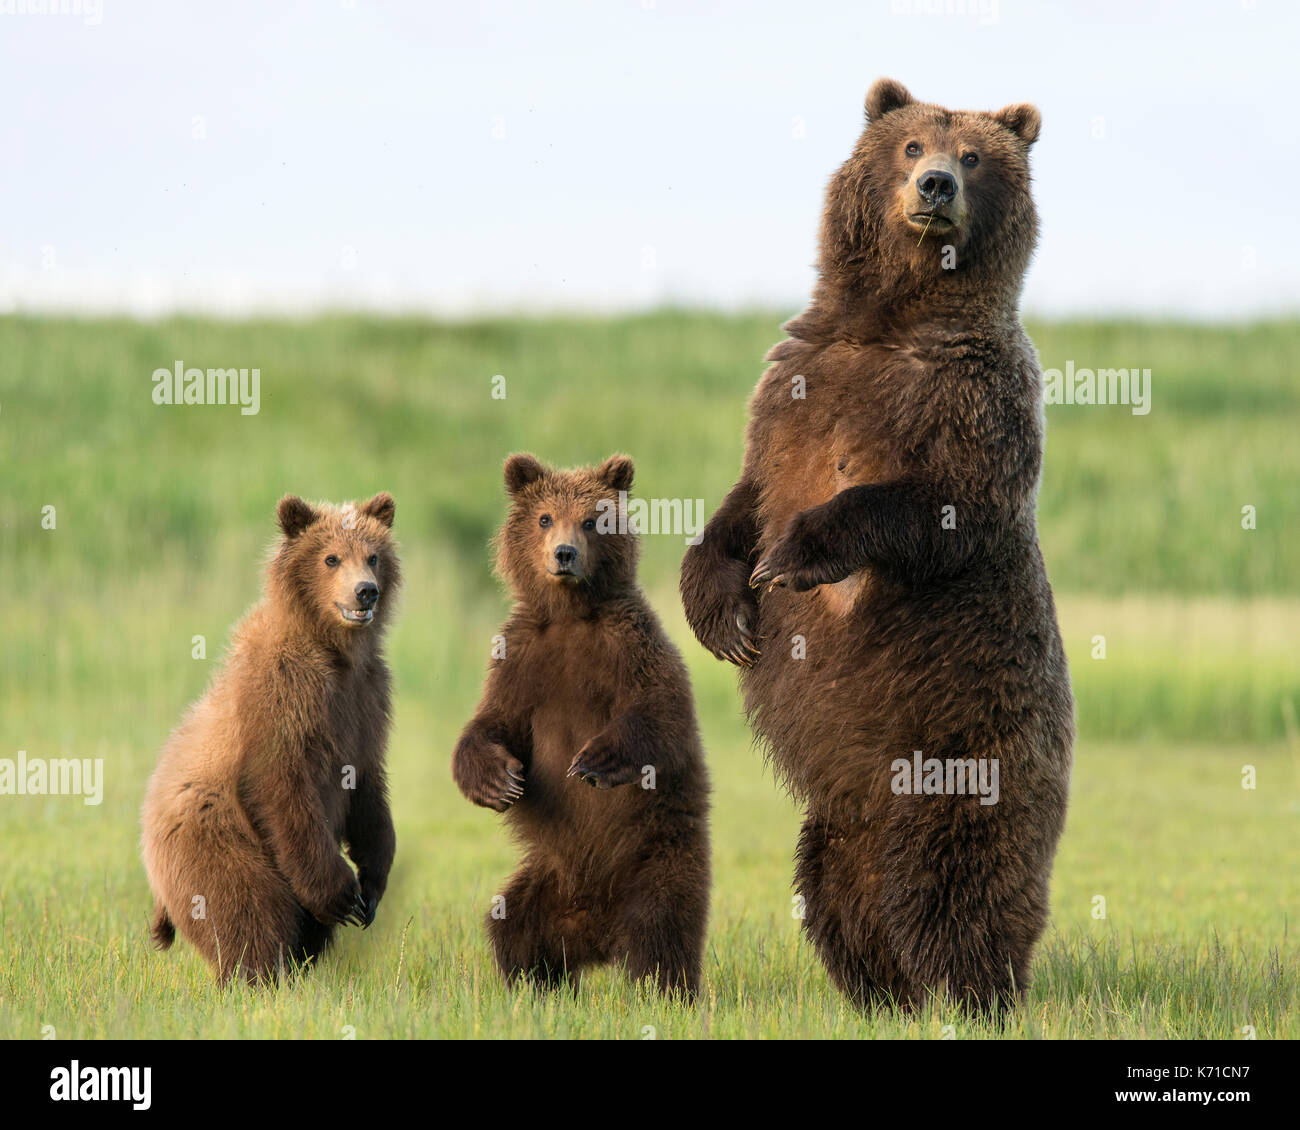 Brown bear sow and yearling cubs standing Stock Photo